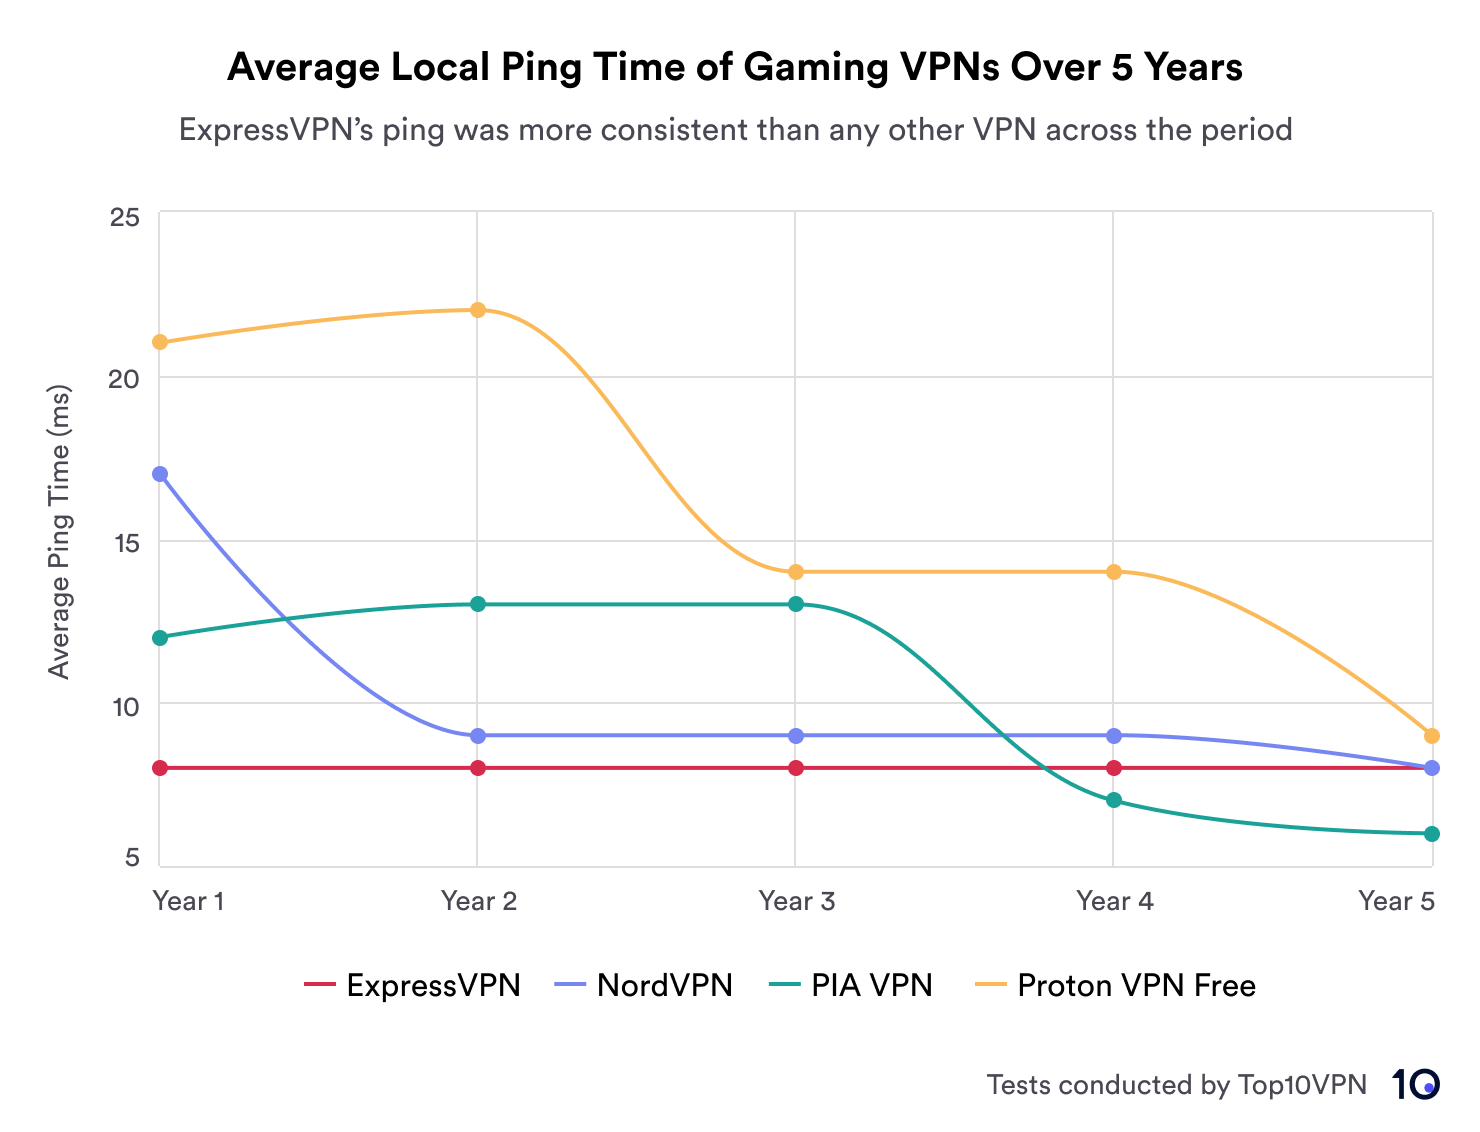 A line graph comparing the average ping times of four VPNs—ExpressVPN, NordVPN, PIA VPN, and Proton VPN Free—over five years.